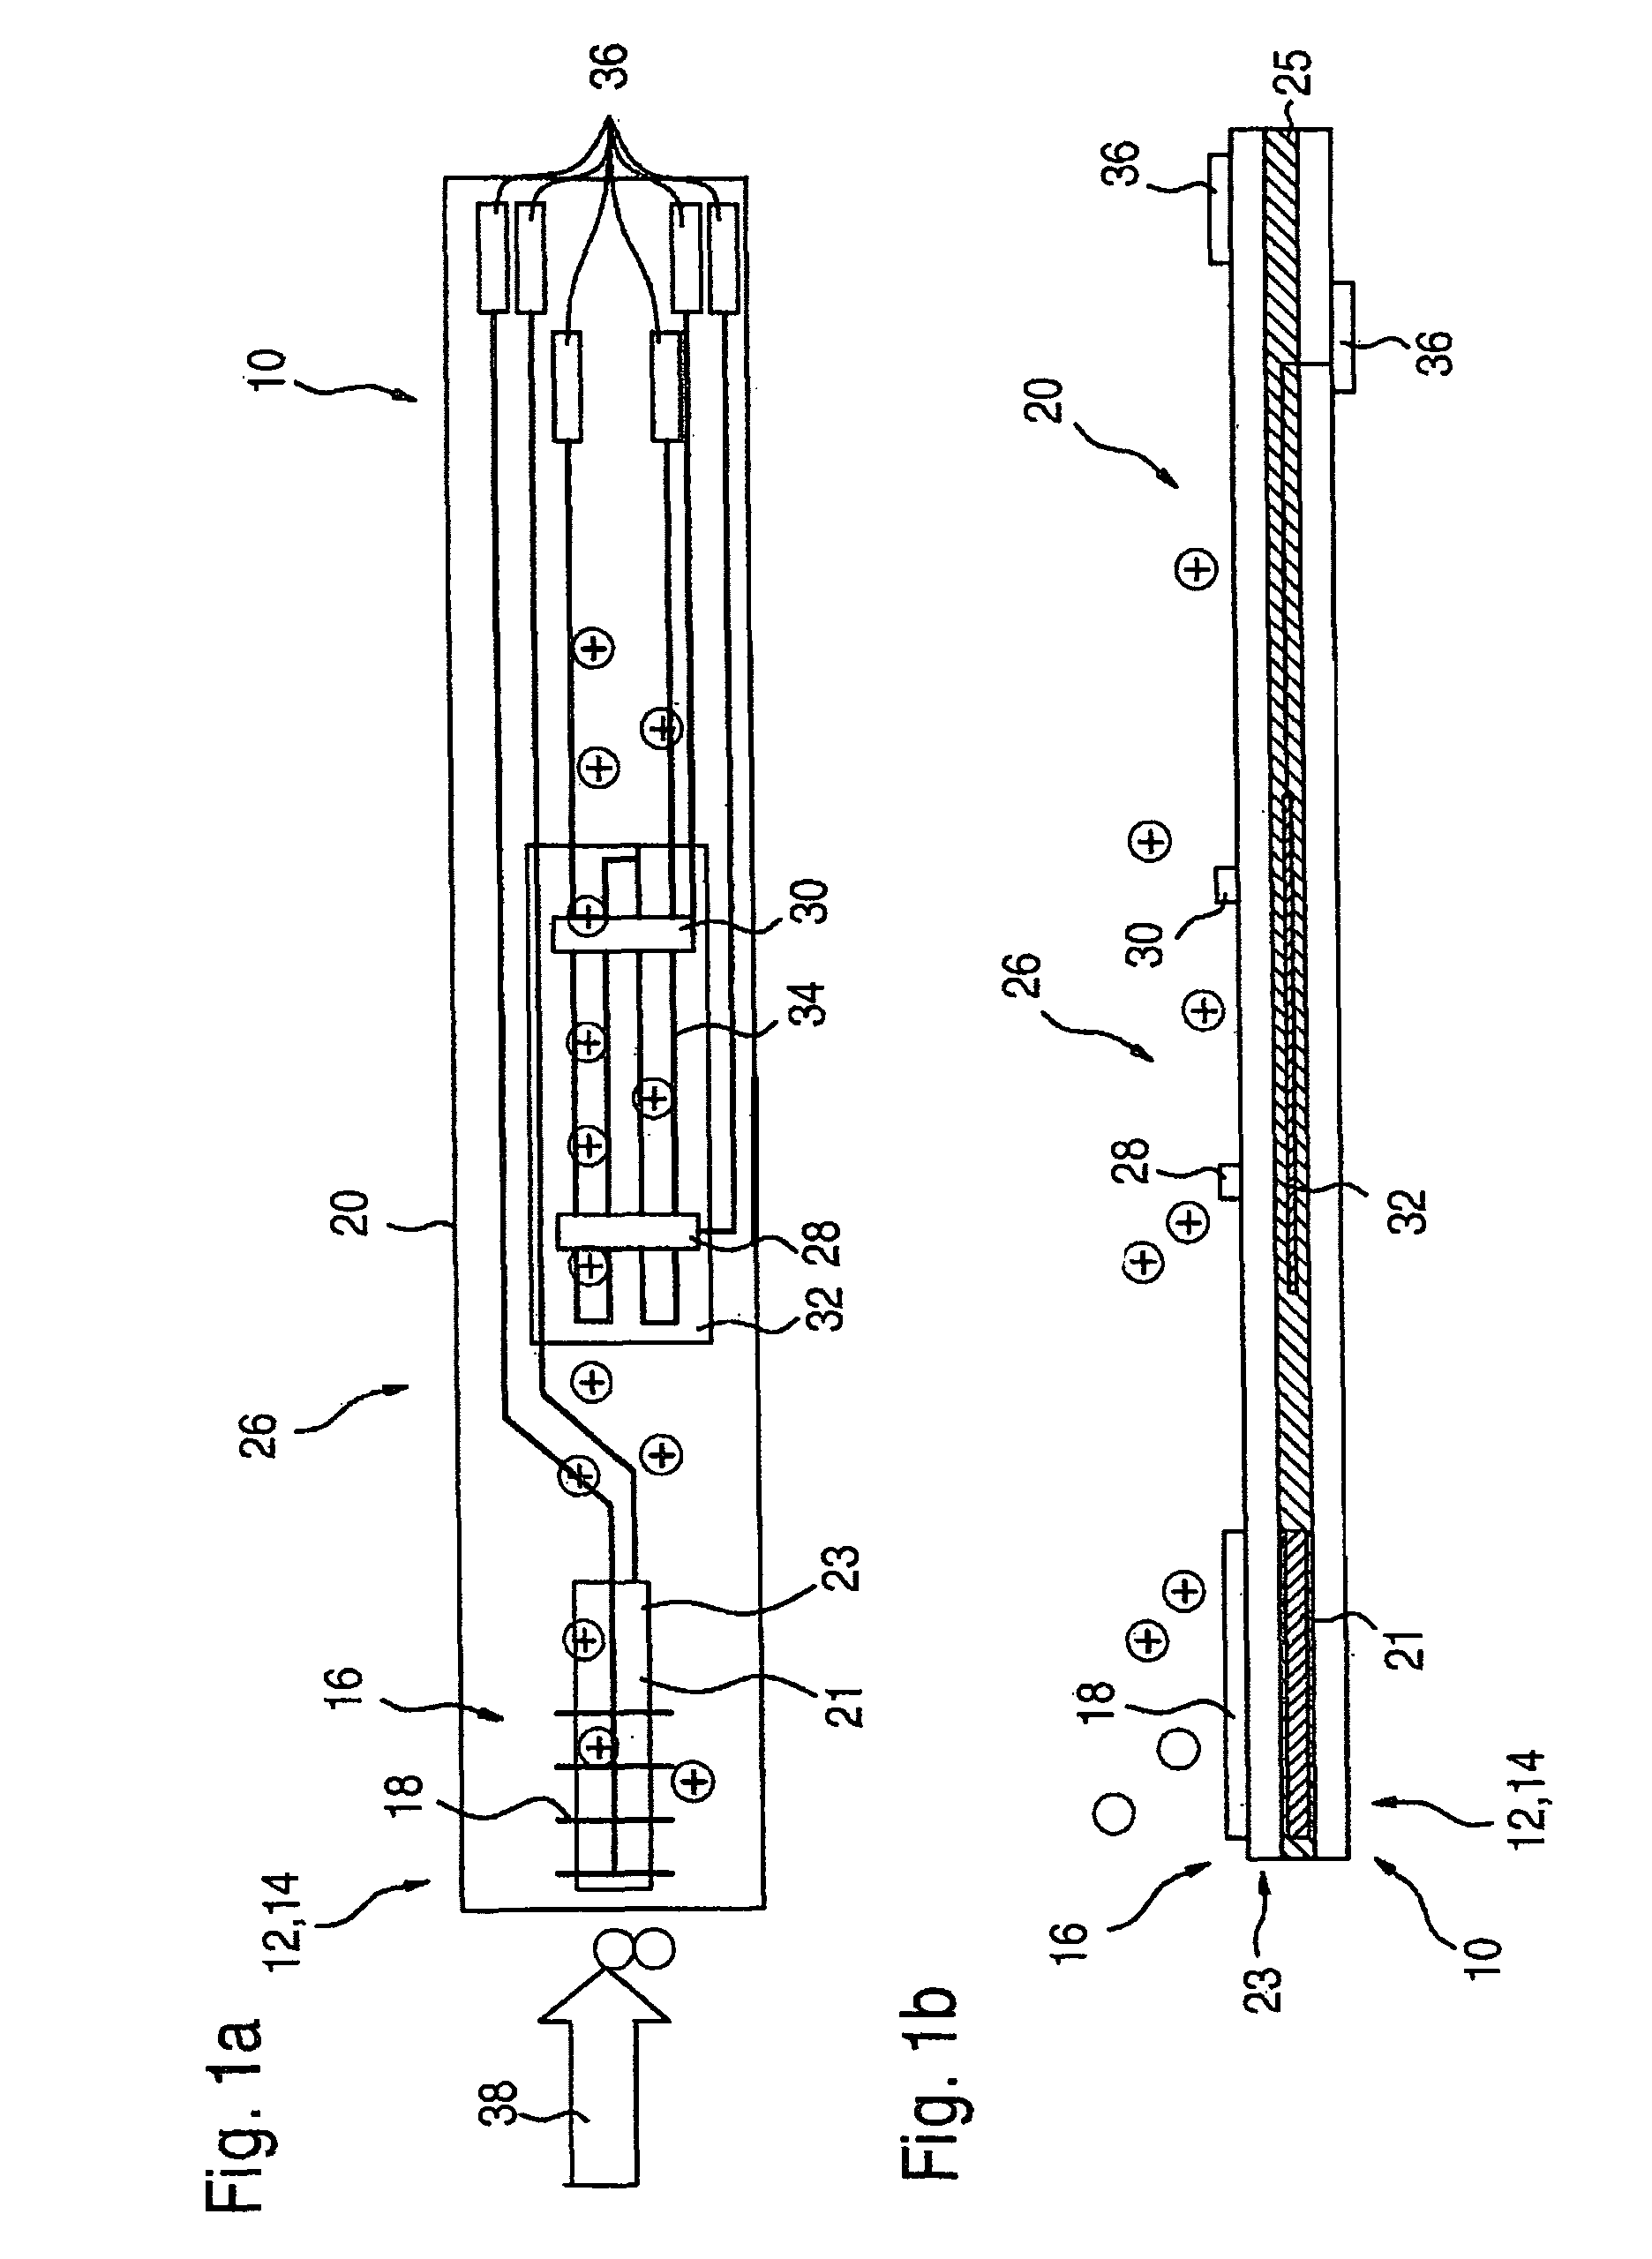 Device and method for measuring exhaust gas with charged particles